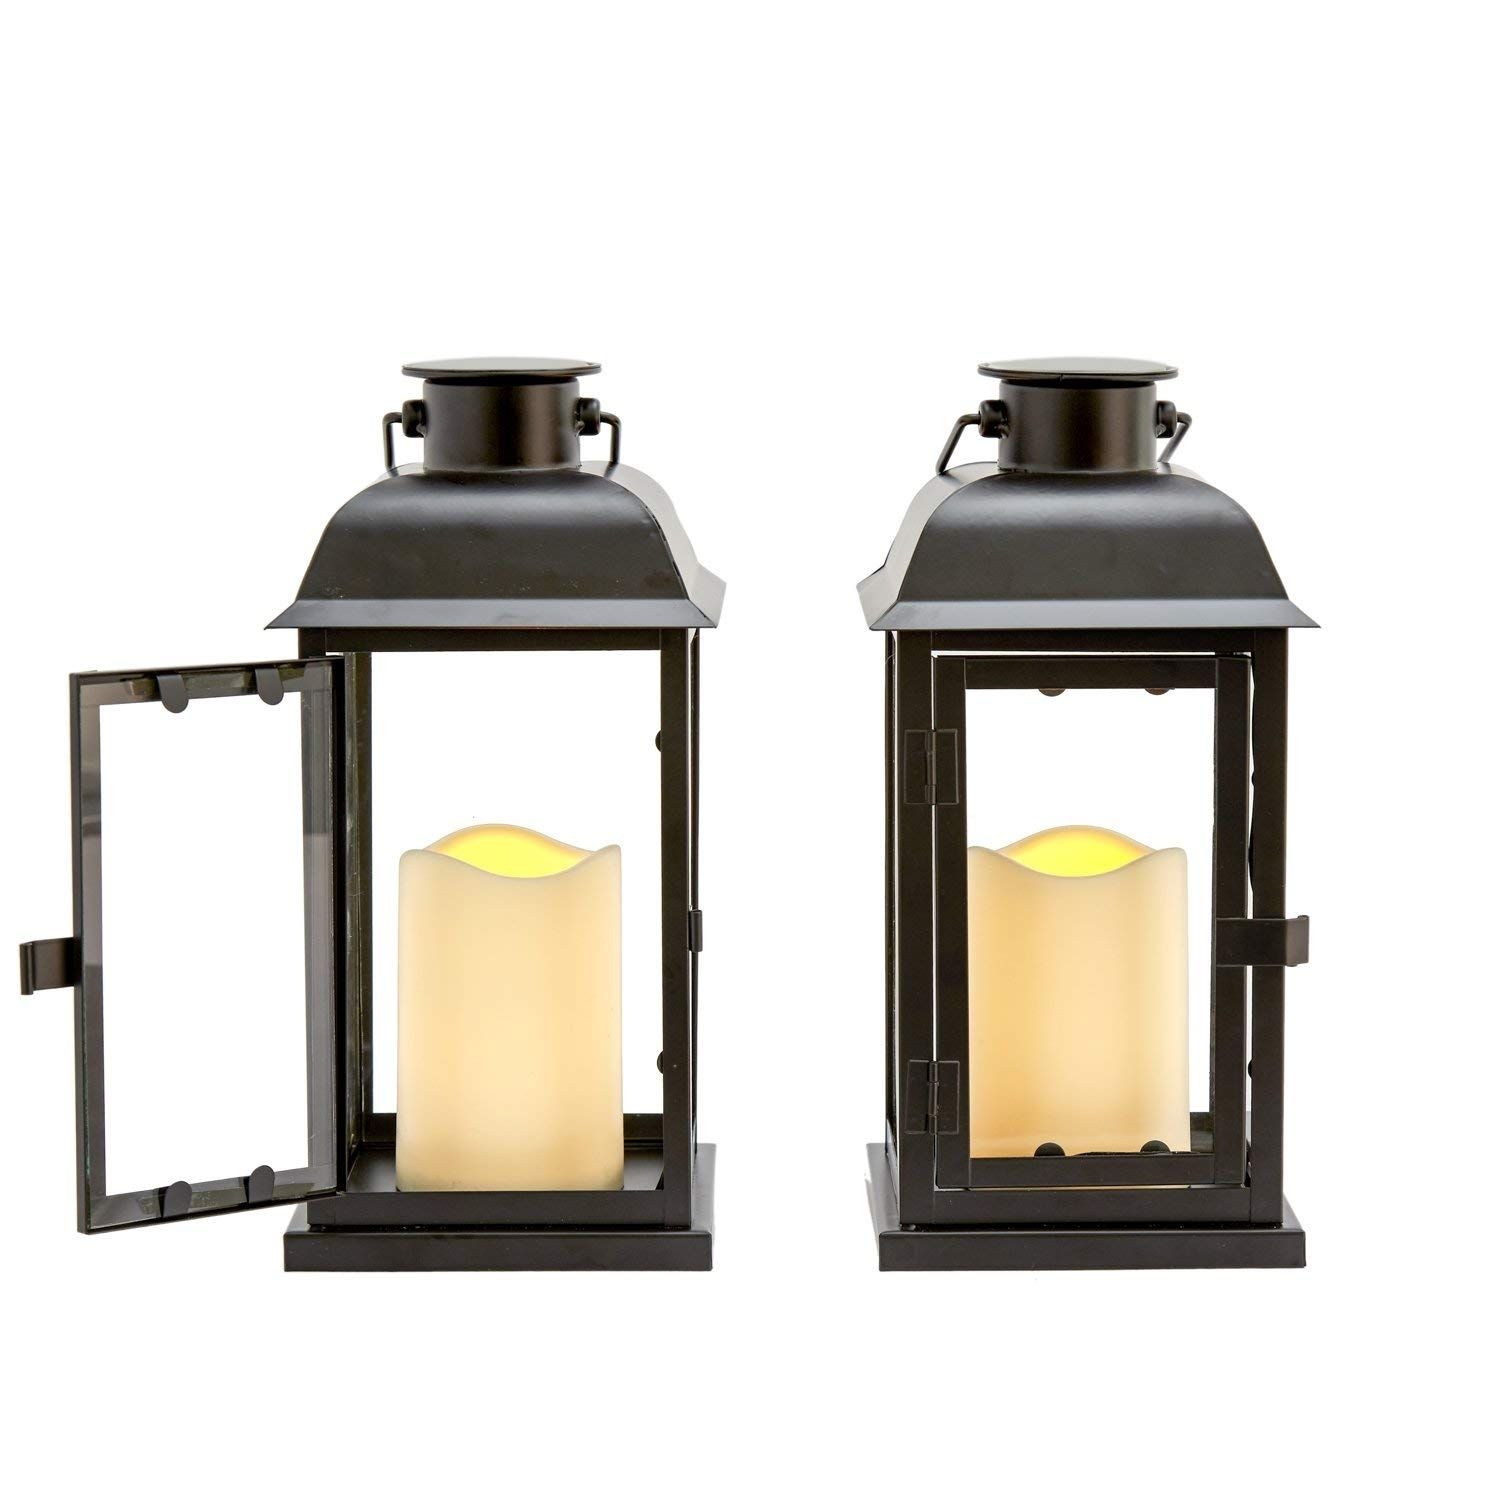 Amazon : Outdoor Black Solar Candle Lanterns, 11" Height, Warm Pertaining To Gold Outdoor Lanterns (View 15 of 20)